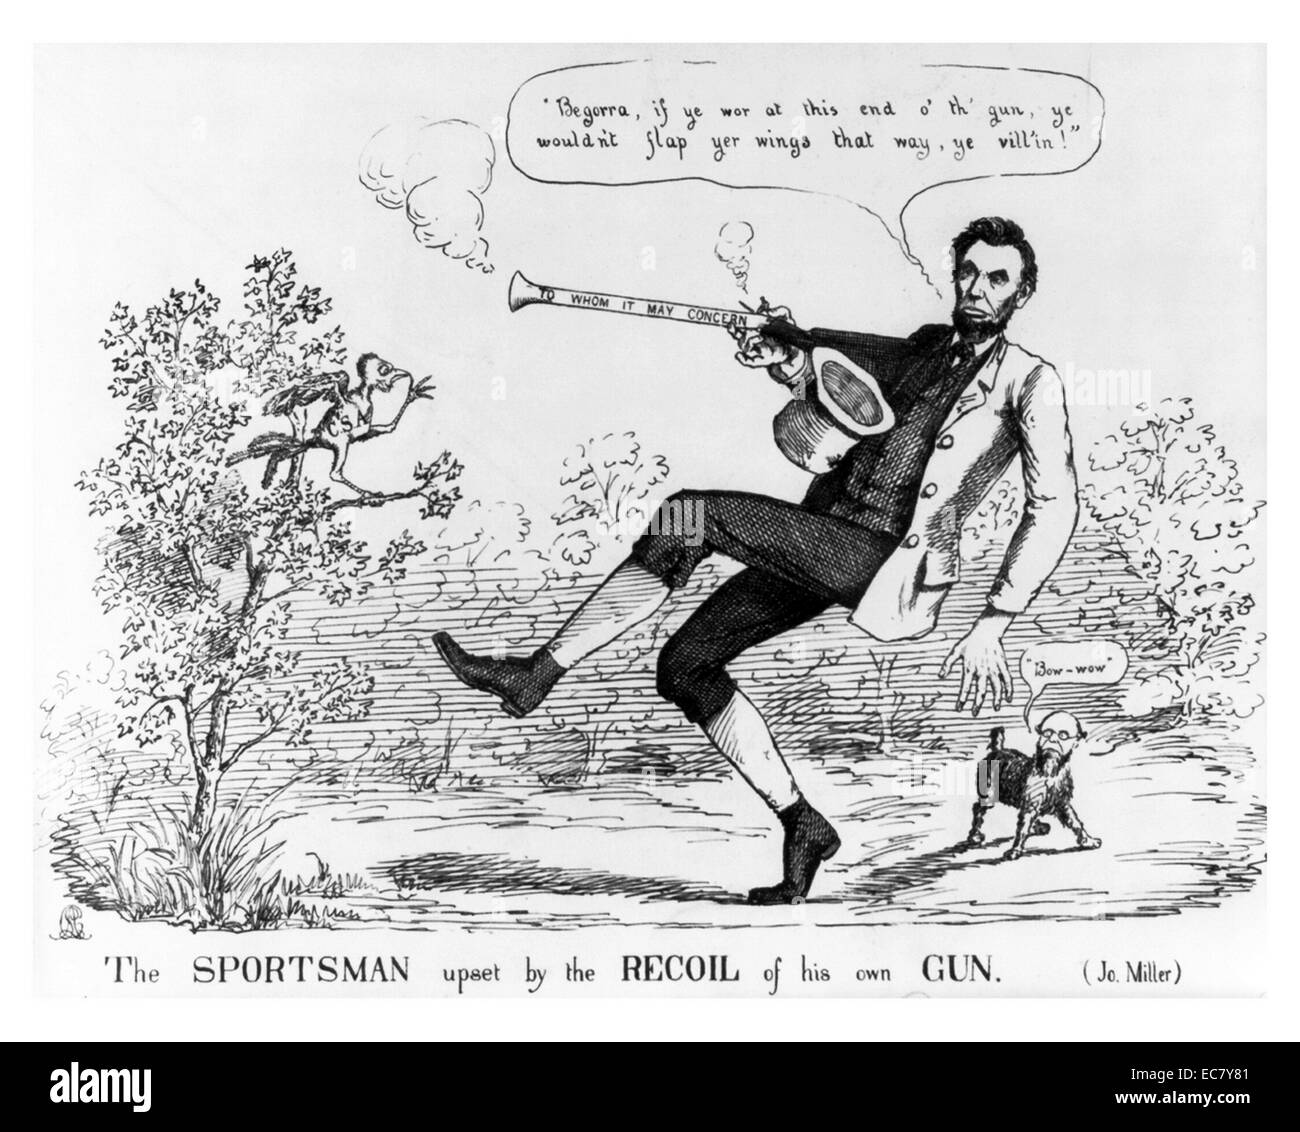 The sportsman upset by the recoil of his own gun' Lincoln (1809-1865) is portrayed as meek and ineffectual in his prosecution of the war. In a wooded scene Lincoln, here in the character of an Irish sportsman in knee-breeches, discharges his blunderbuss at a small bird 'C.S.A.' (Confederate States of America). The bird, perched in a tree at left, is unhurt, but Lincoln falls backward vowing, 'Begorra, if ye wor at this end o' th' gun, ye wouldn't flap yer wings that way, ye vill'in!' At right Secretary of War Stanton, who has the body of a dog, barks, 'Bow-wow.' Stock Photo